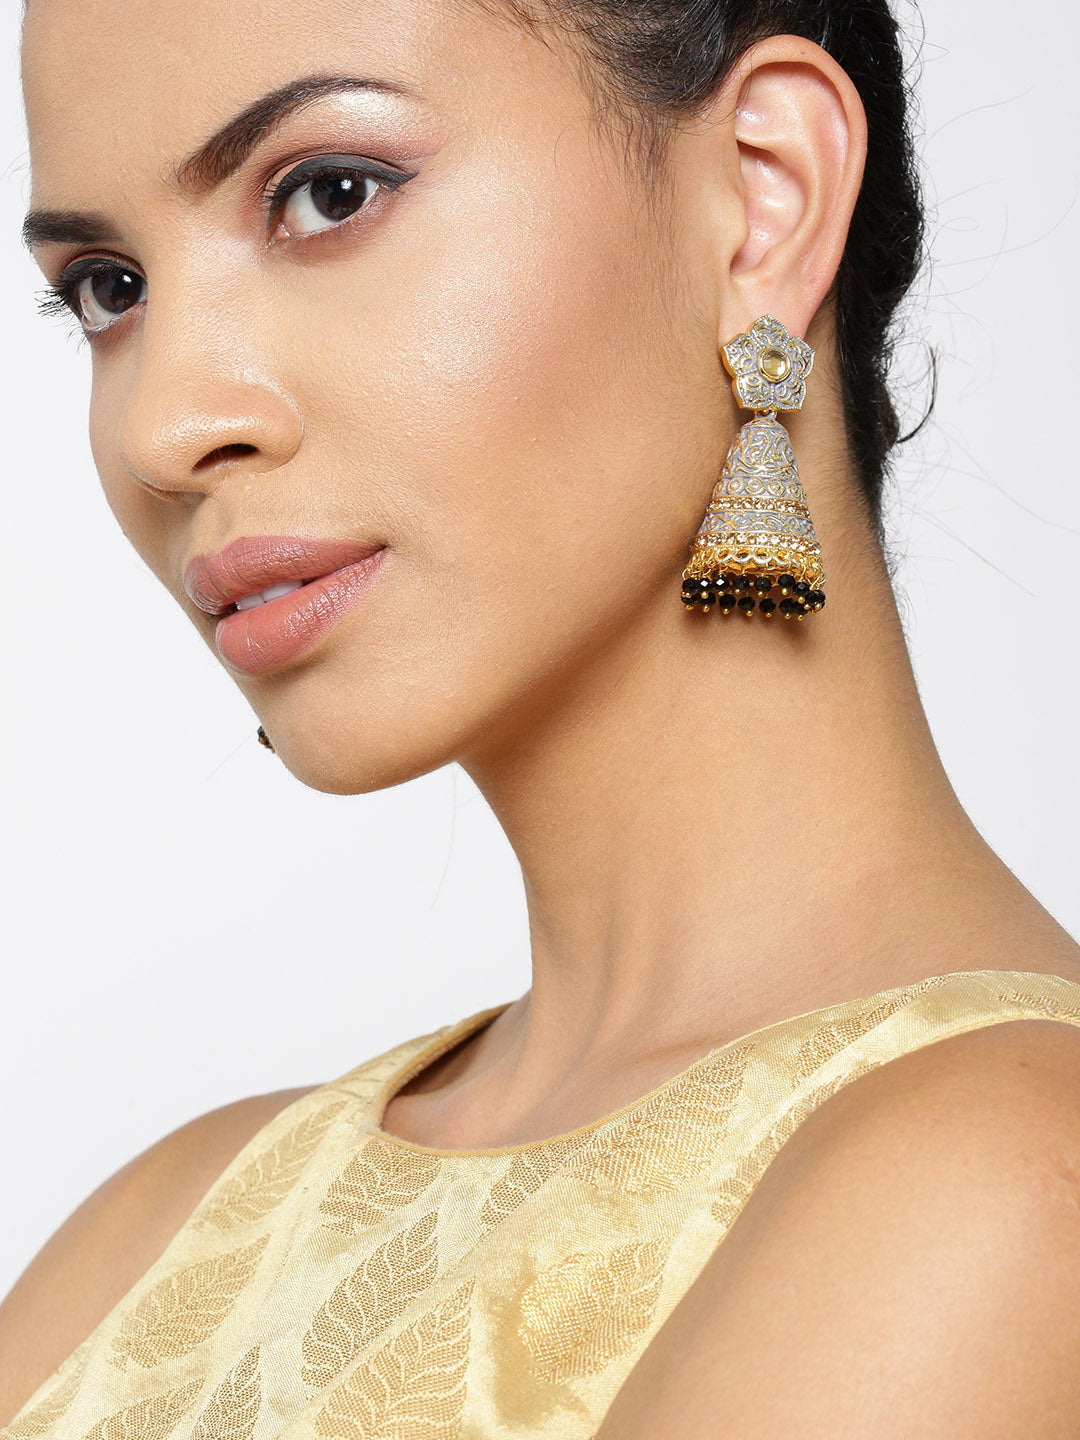 Gold-Plated Floral Patterned Jhumka Earrings with Meenakari Grey Colour with Beads Drop